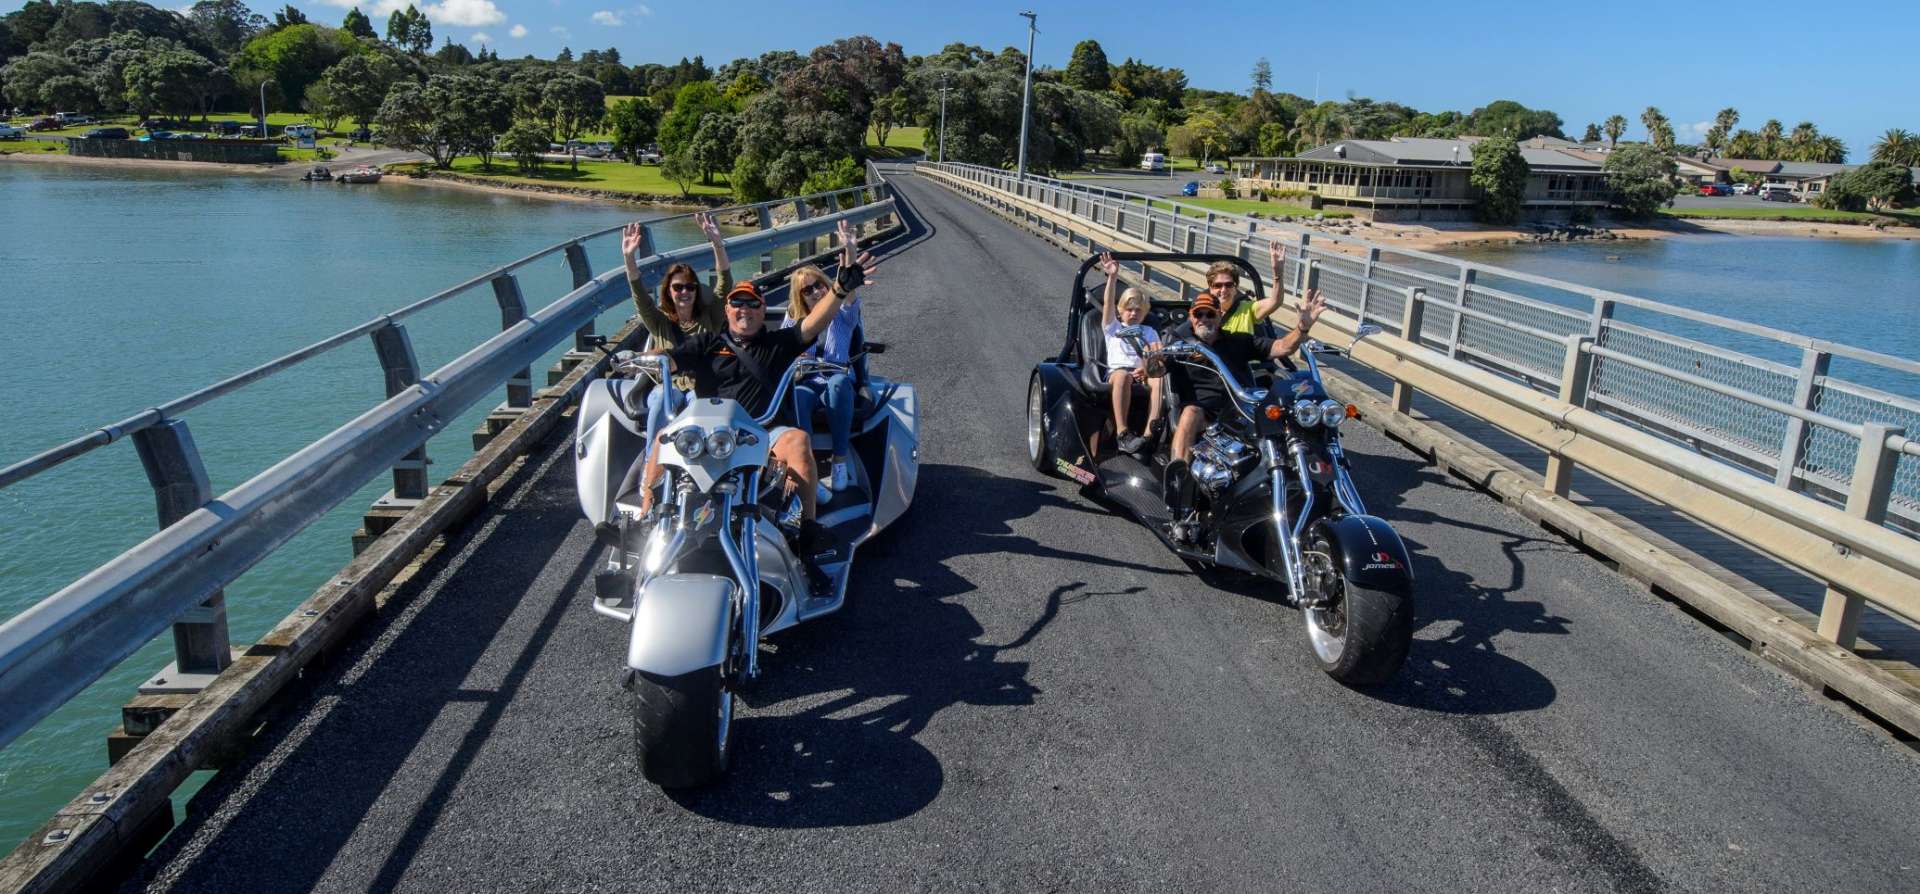 Thunder Trike Tours is a fun activity in the Bay of Islands